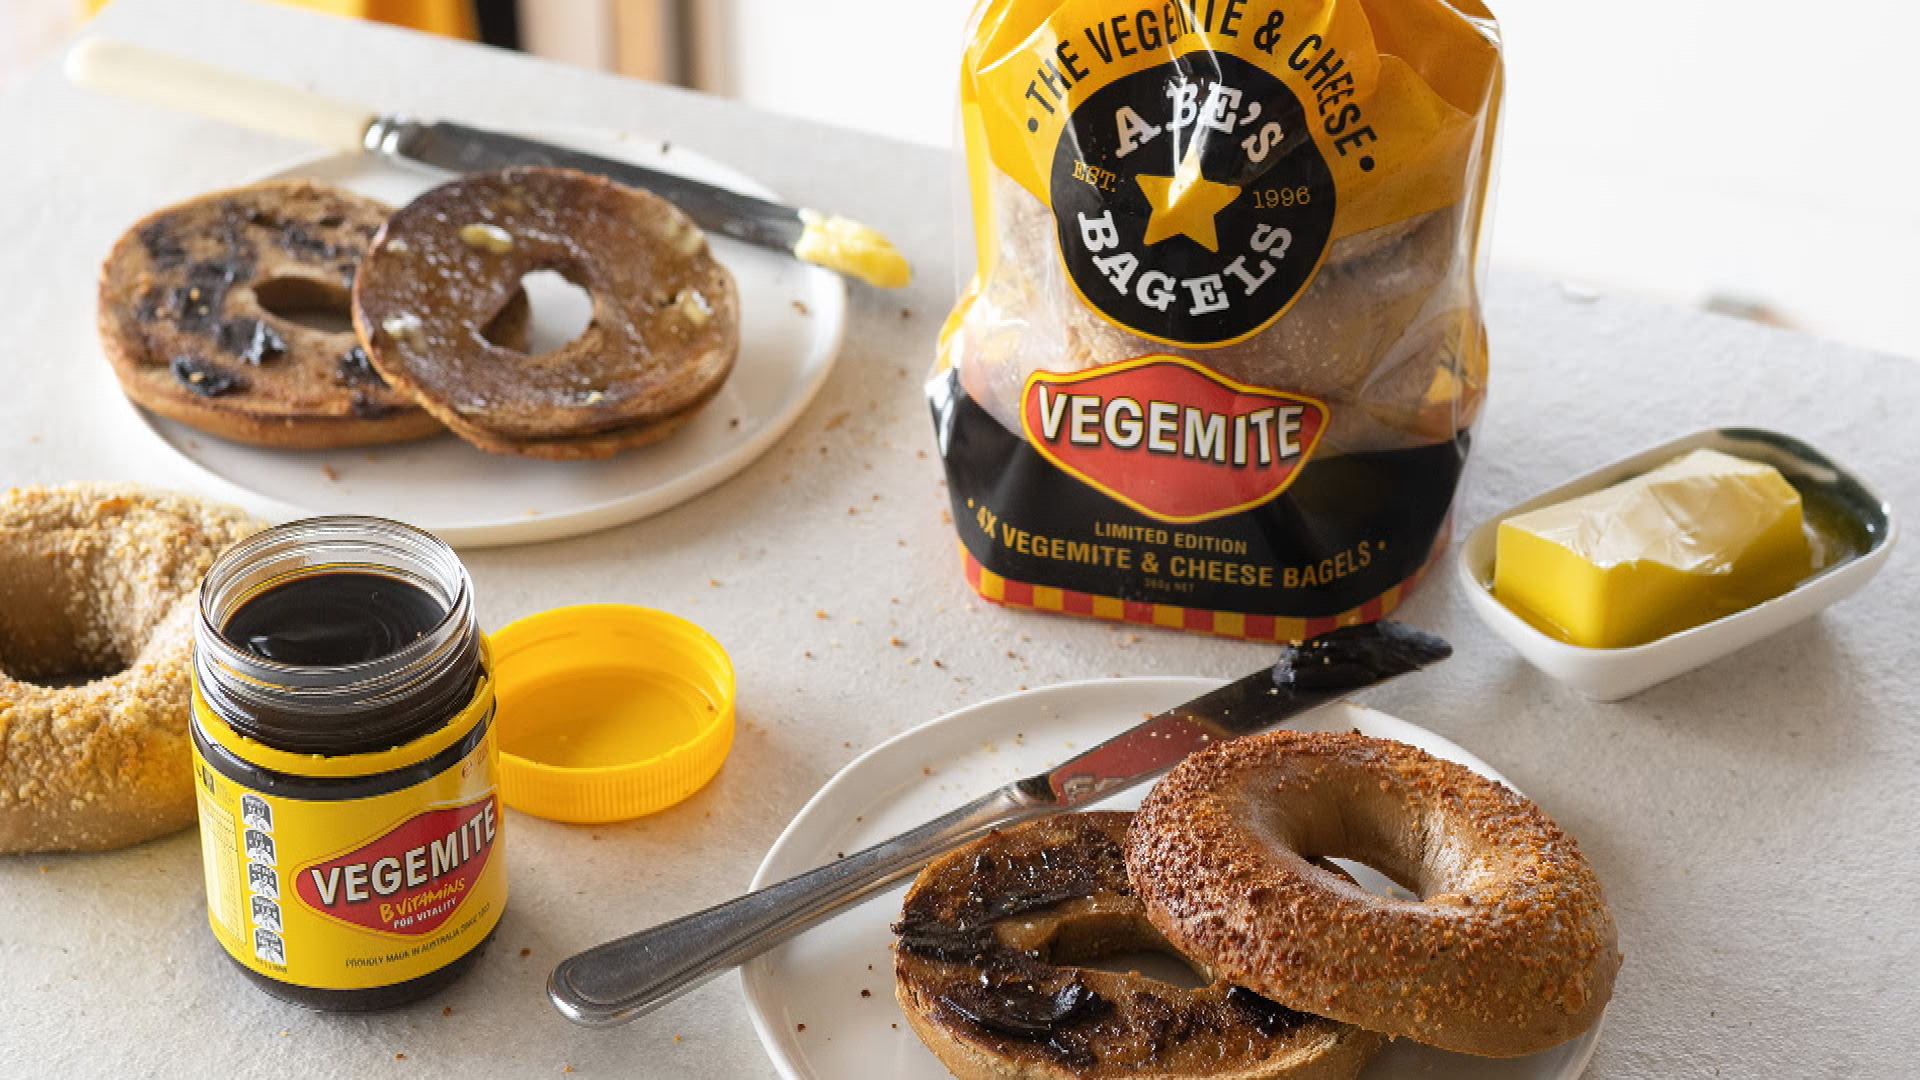 Limited edition Vegemite and cheese bagels in stores today